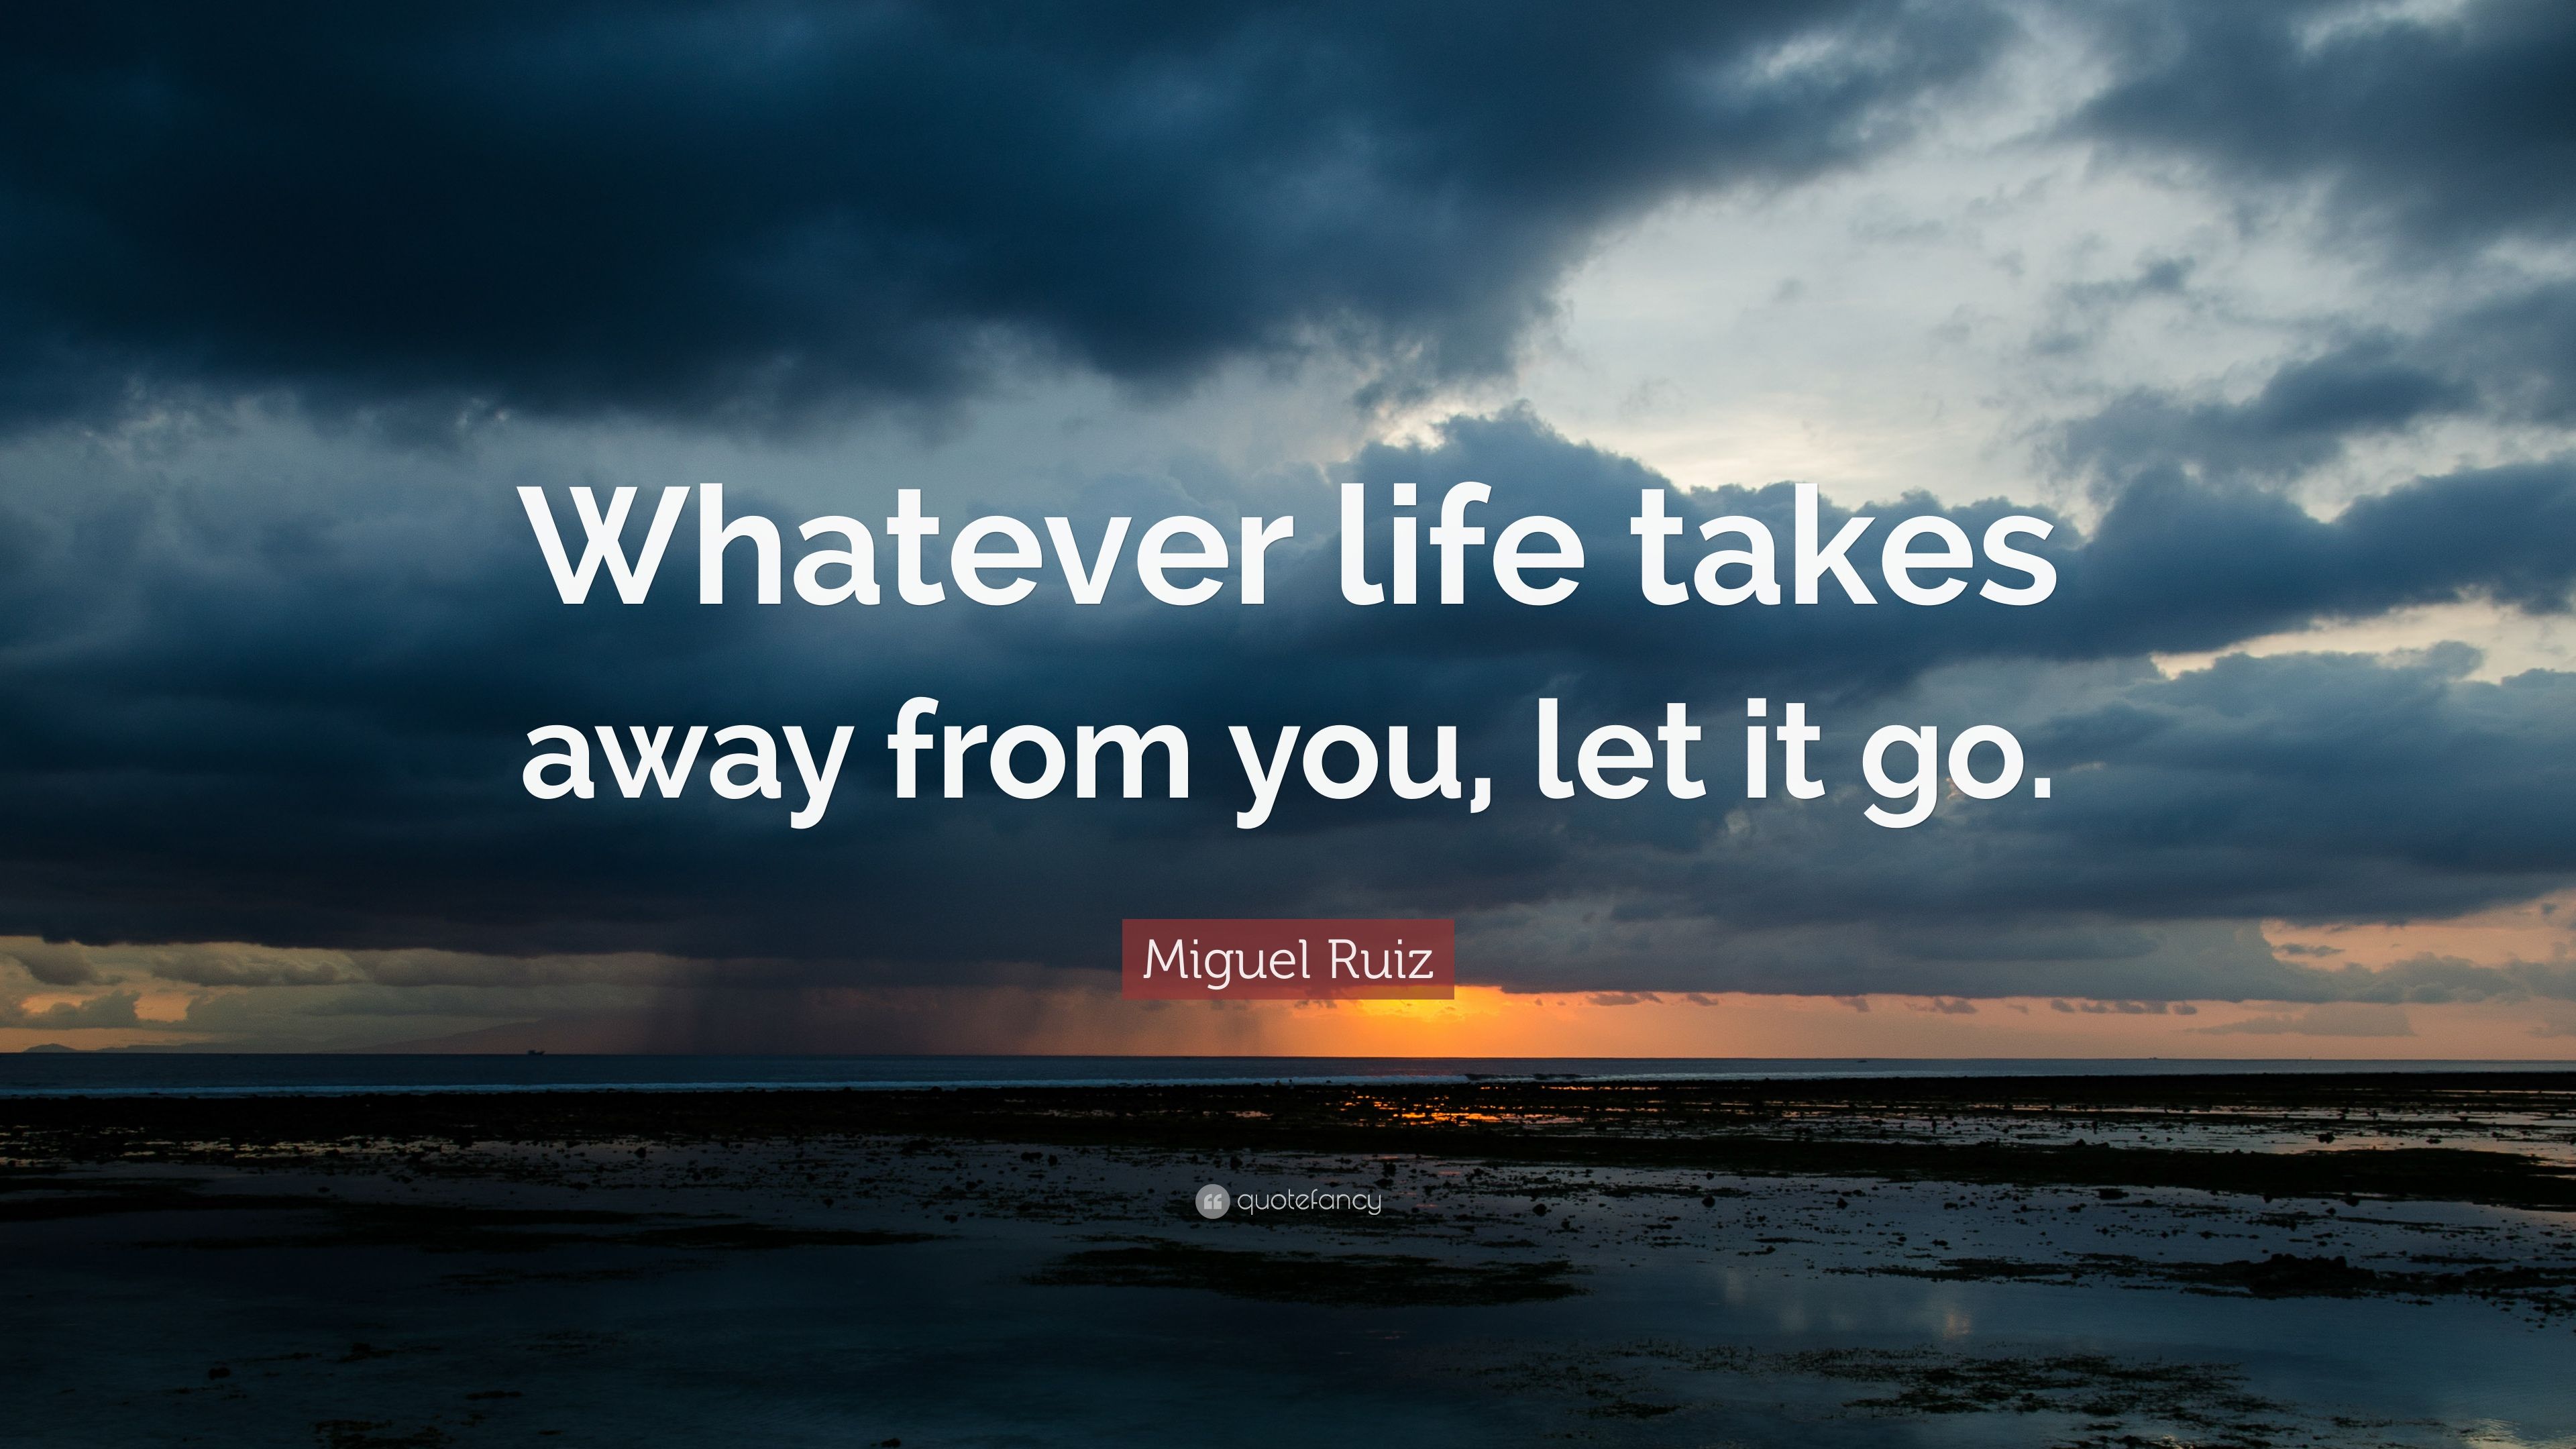 Miguel Ruiz Quote: “Whatever life takes away from you, let it go.” (11 wallpaper)